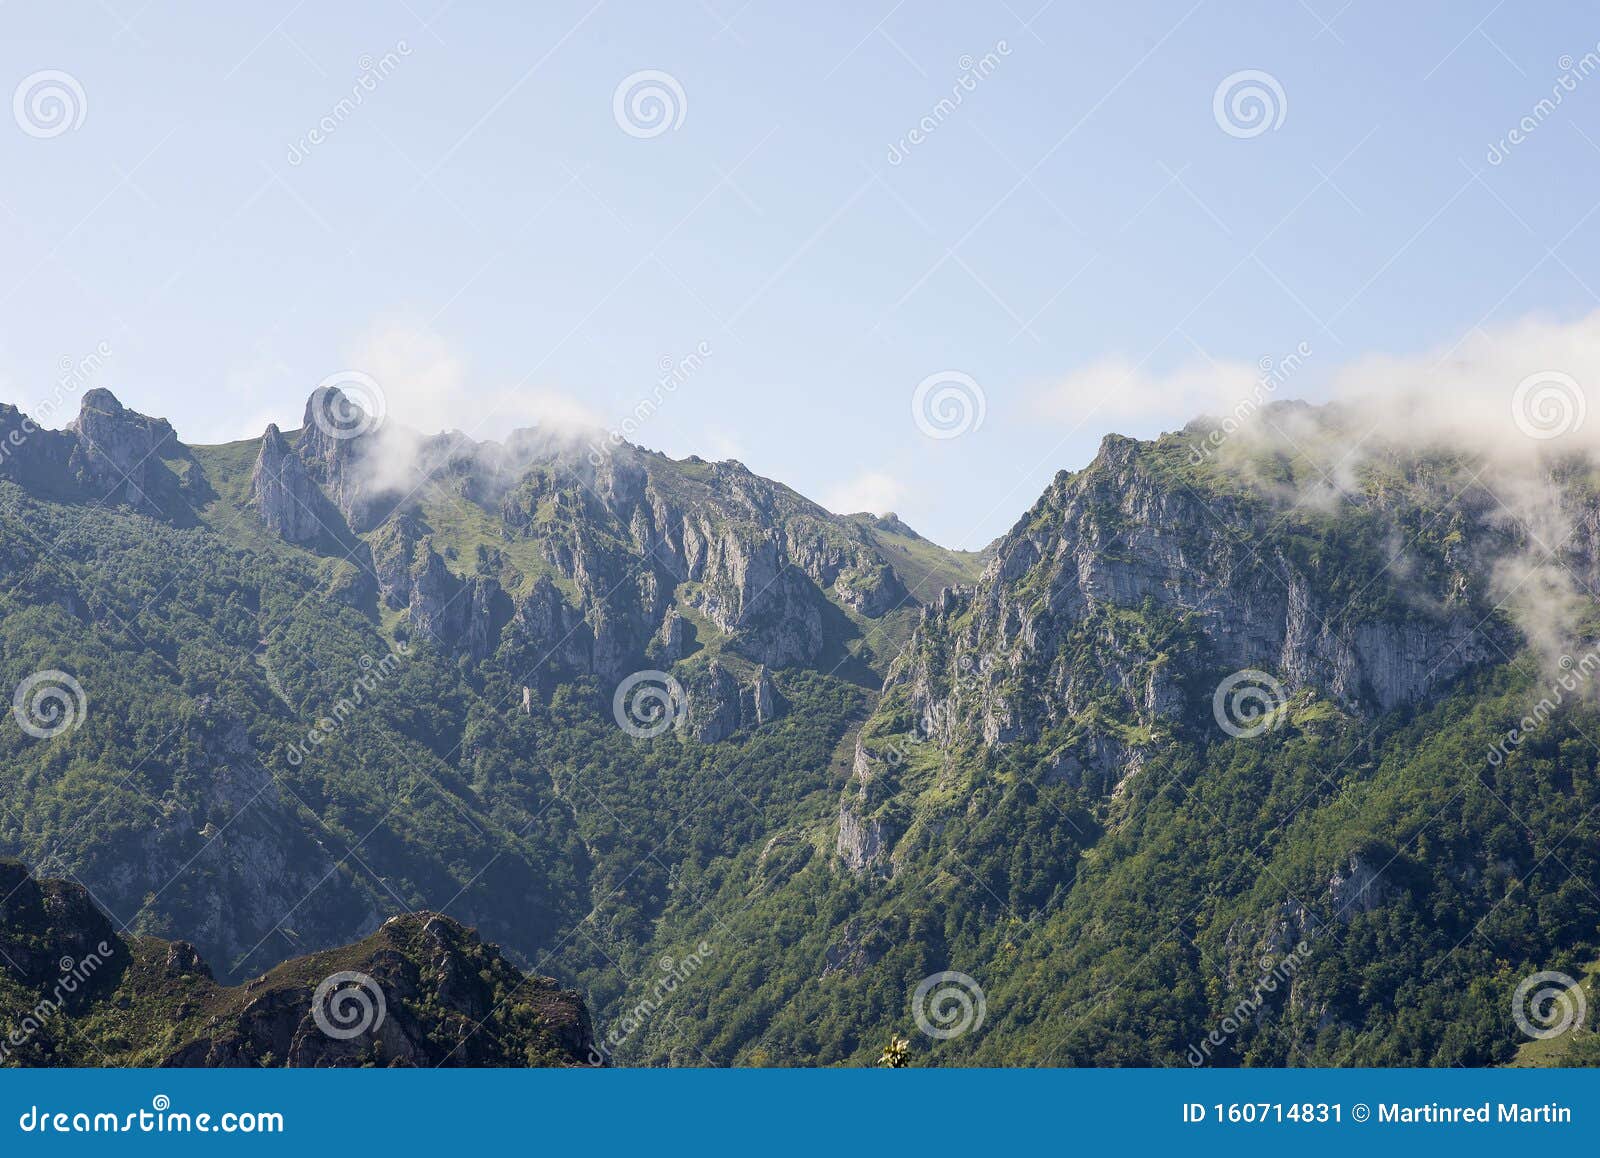 the picos de europa is a mountain massif located in northern spain that belongs to the central part of the cantabrian mountain